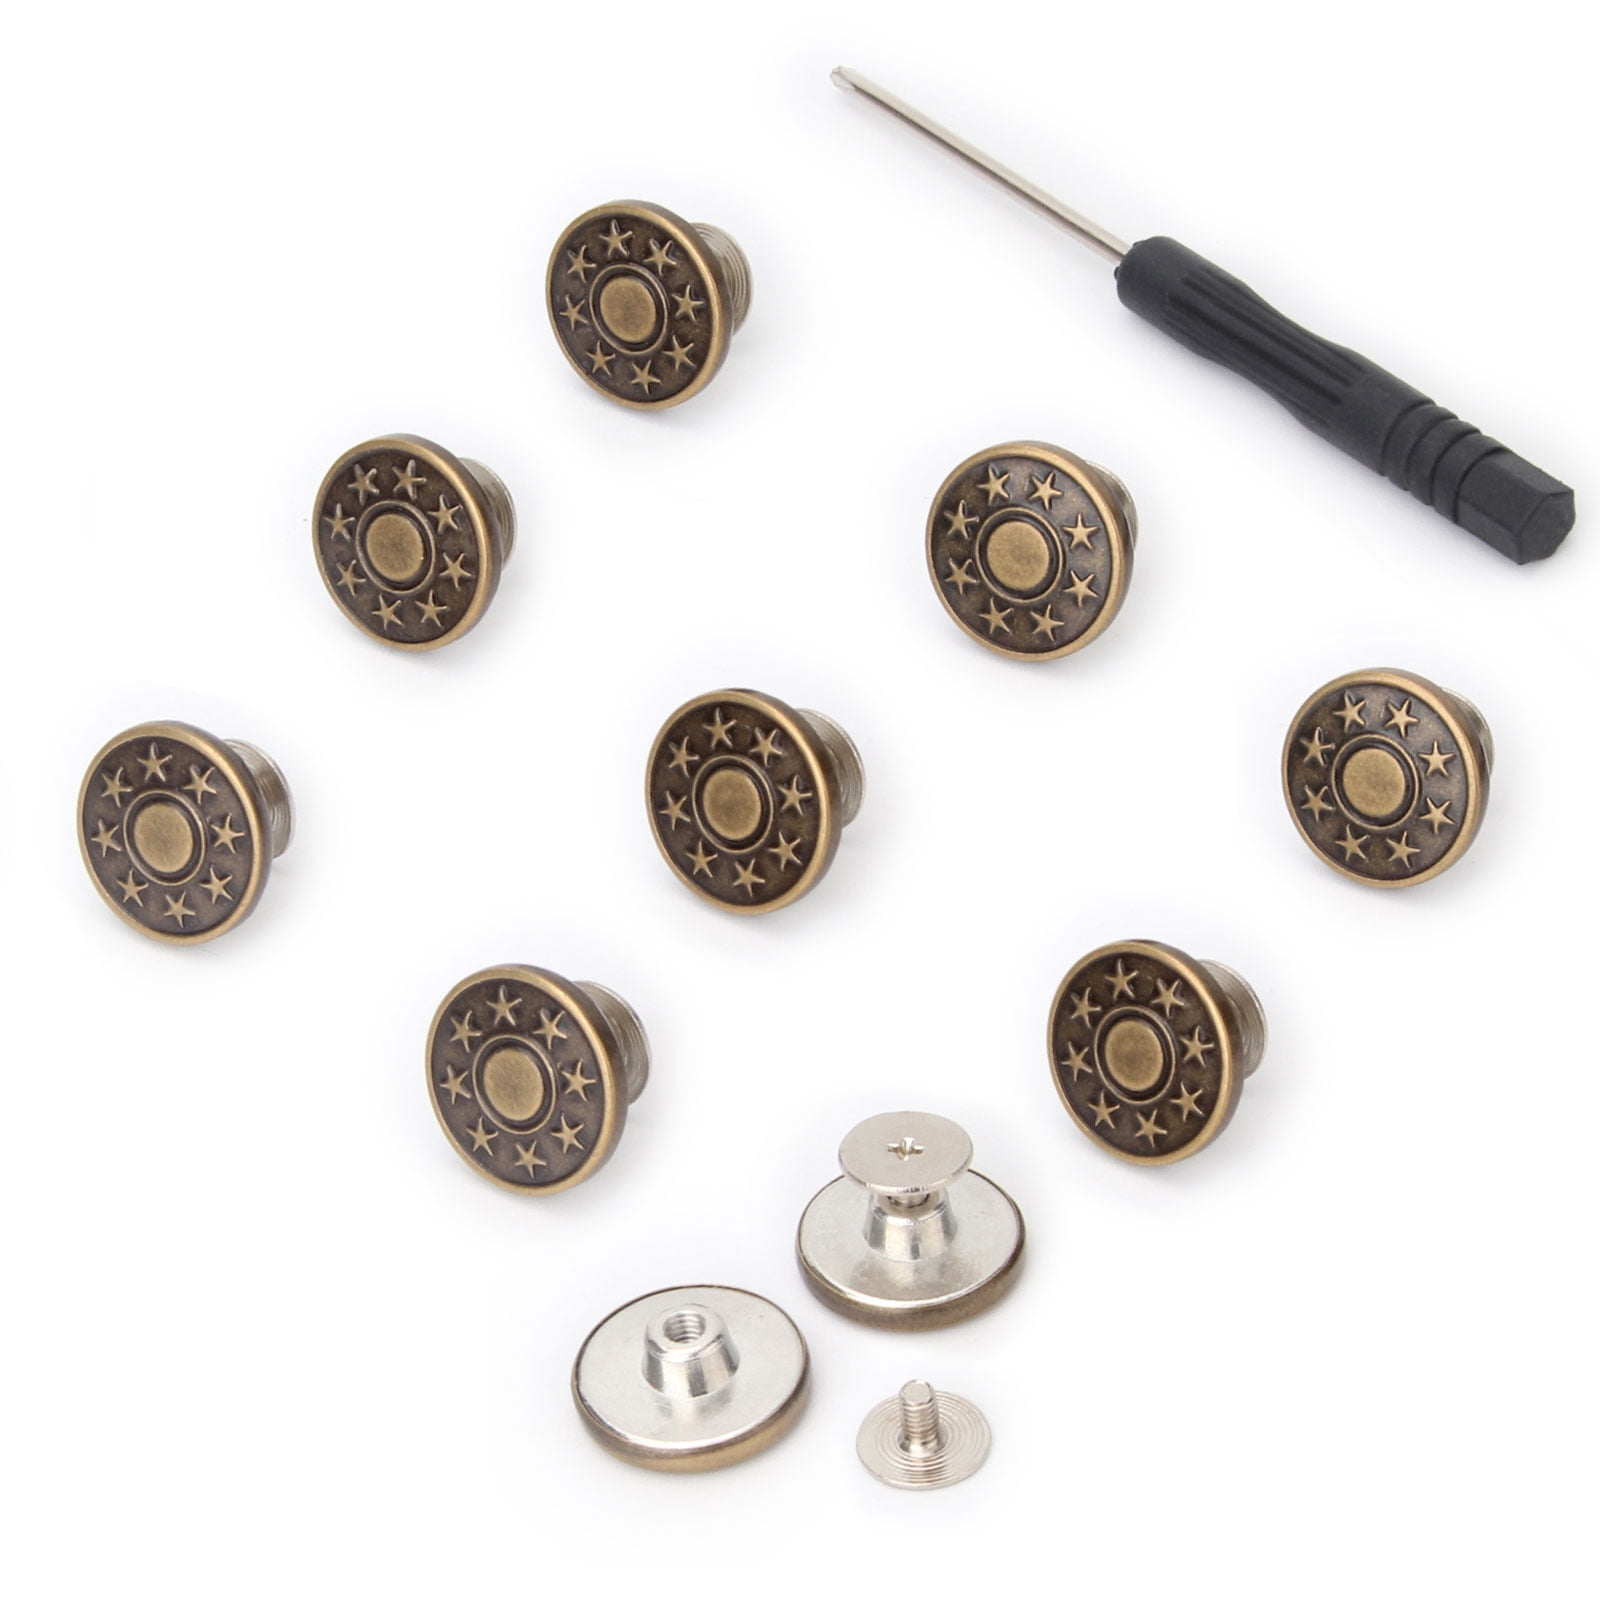 Metal Bachelor Suspender Buttons With Nail Kits Replacement Instant  Suspenders For Clothes From Lianzi666321, $9.02